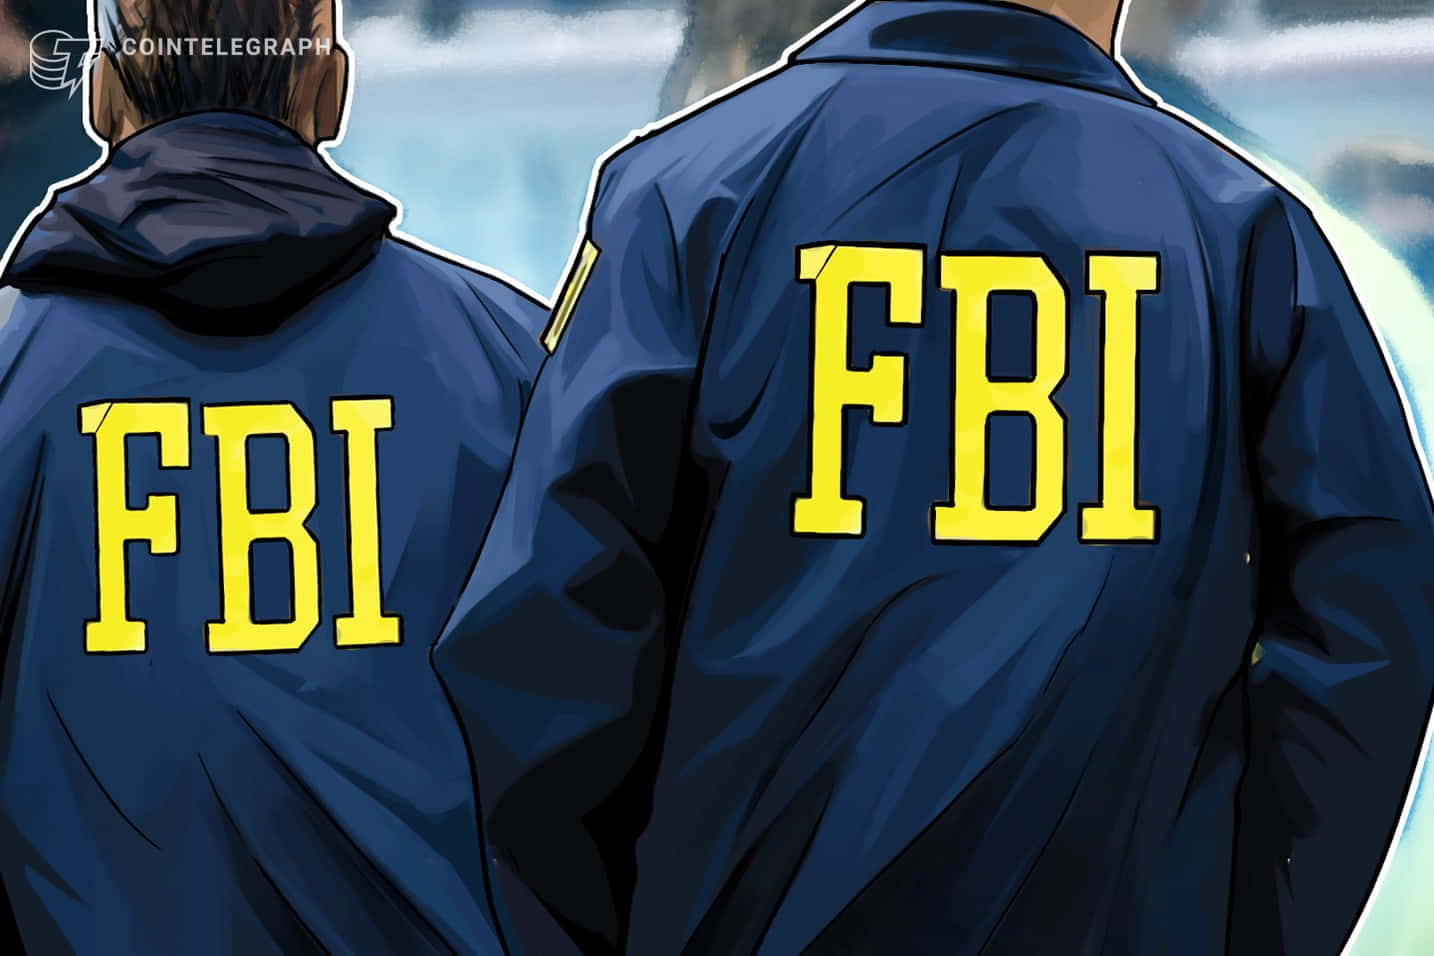 Two Men In Jackets With The Words Fbi On Them